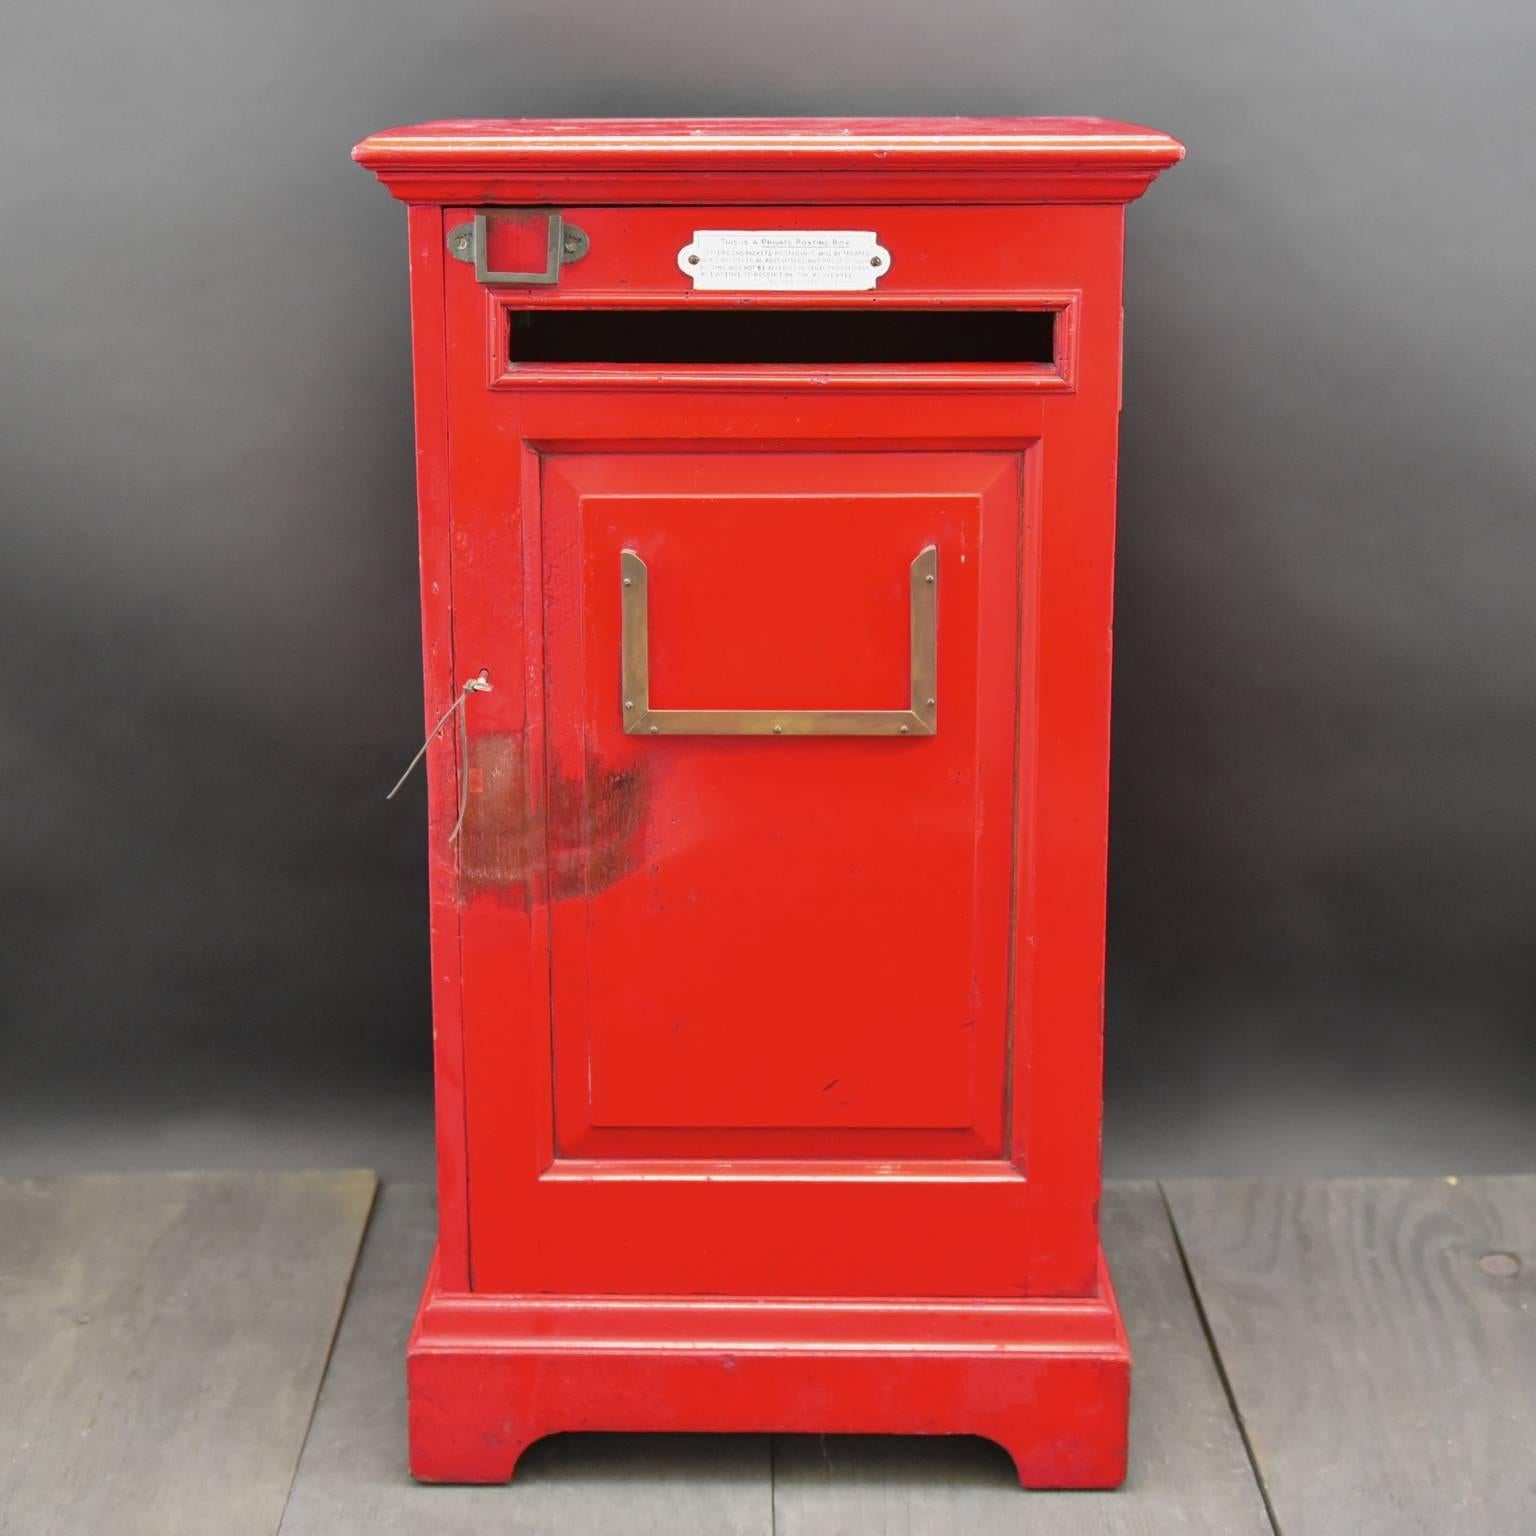 A fantastic painted wooden English 'country house' private red post box likely to have been made for the lobby of a hotel, business, club or a country house. It would have been emptied twice a day and the contents taken to the local Post Office,